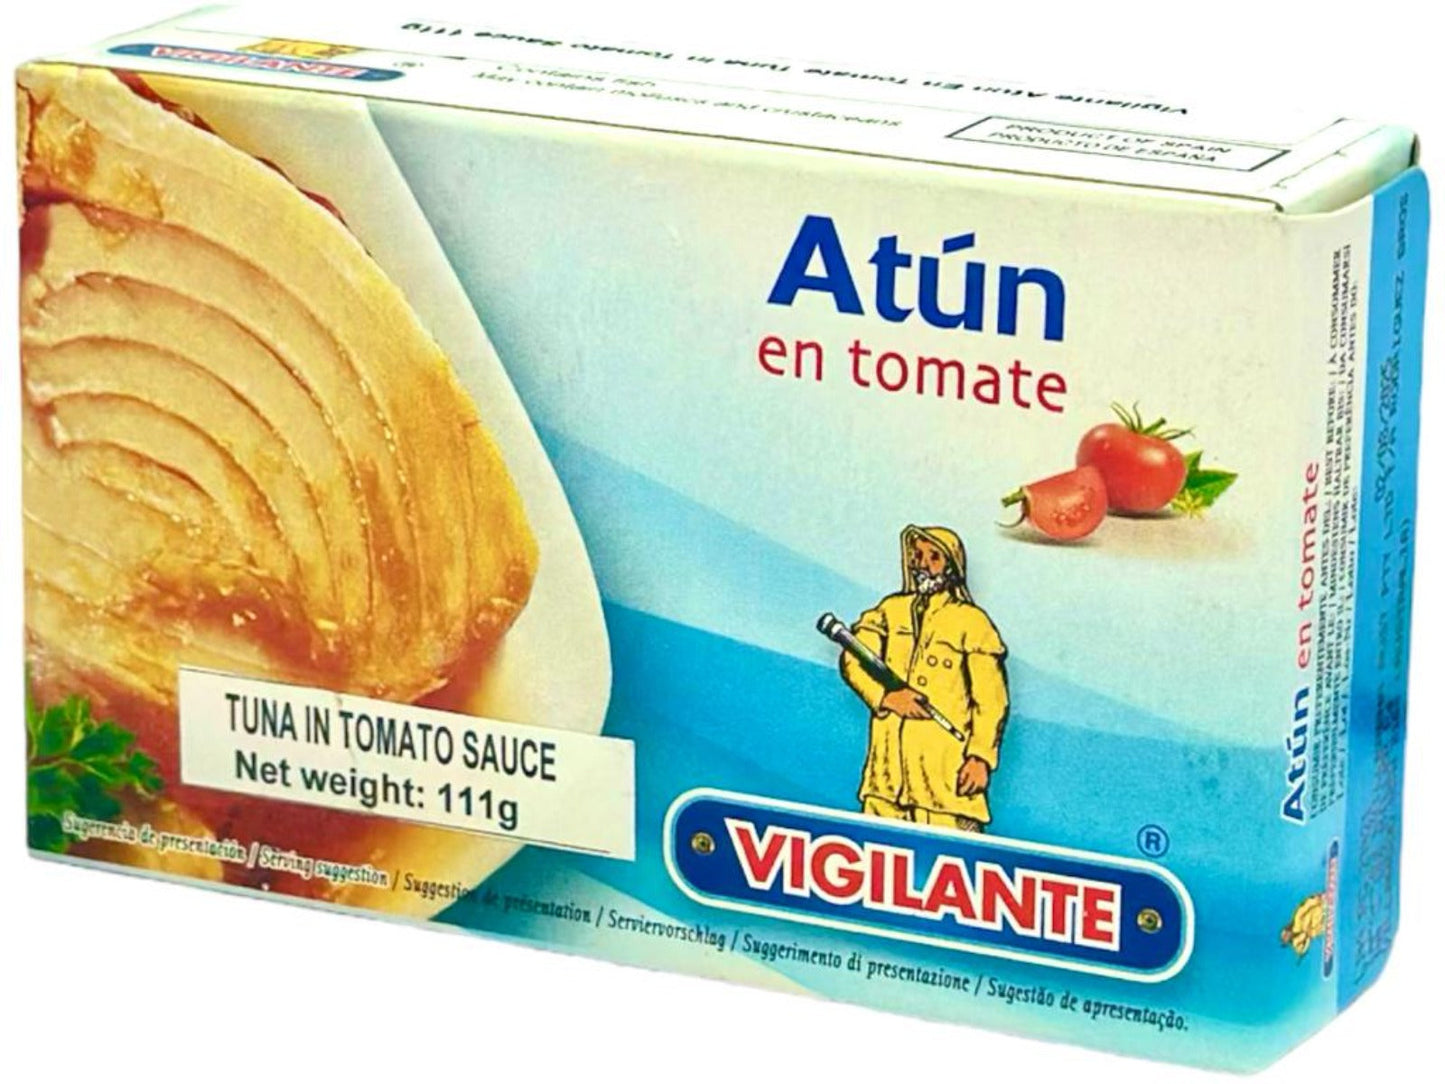 Vigilante Atun en Tomate - Spanish Tuna in Tomato Sauce 111g - 4 Pack Total 444g Best Before August 2025